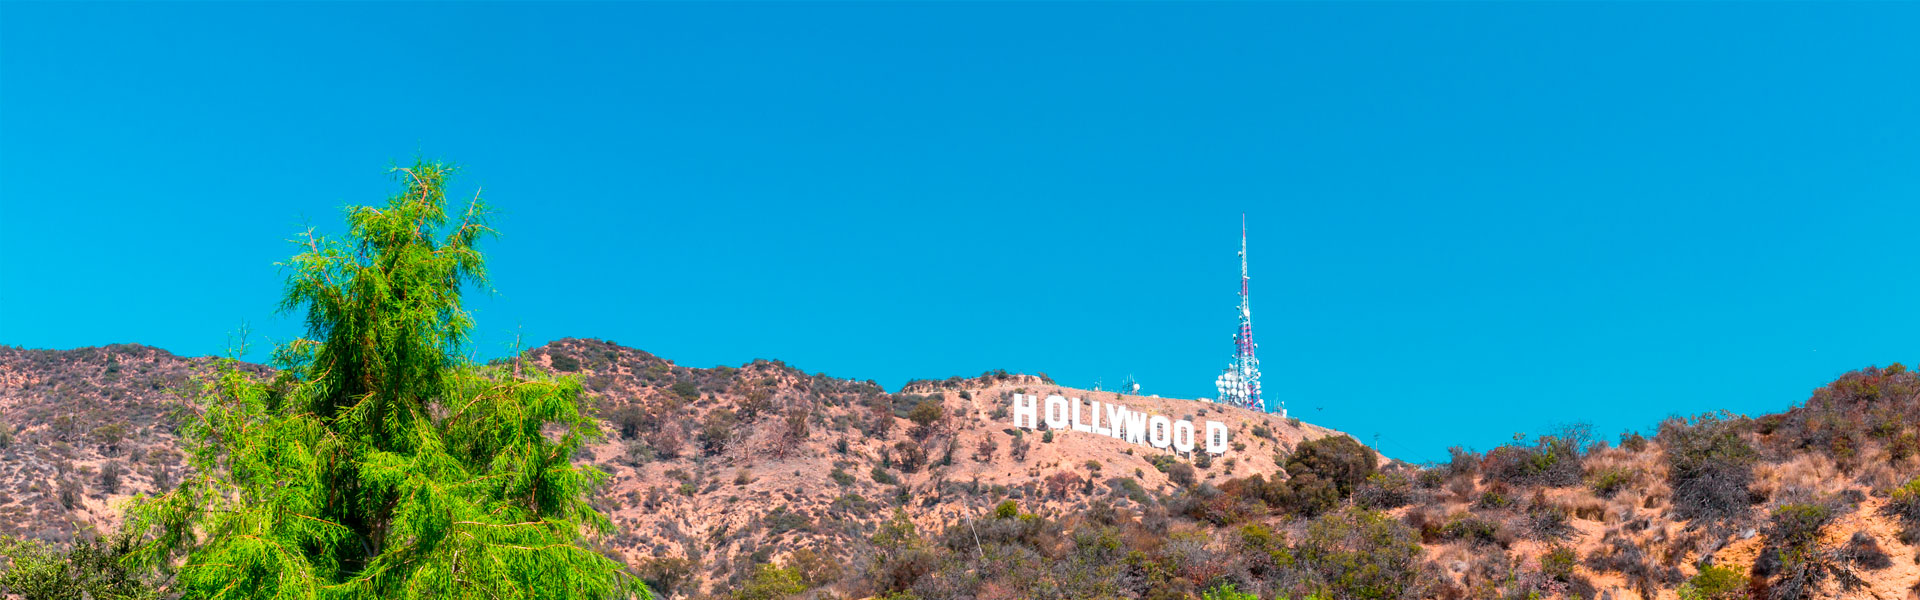 Photographing the Hollywood Sign - A Los Angeles Landmark